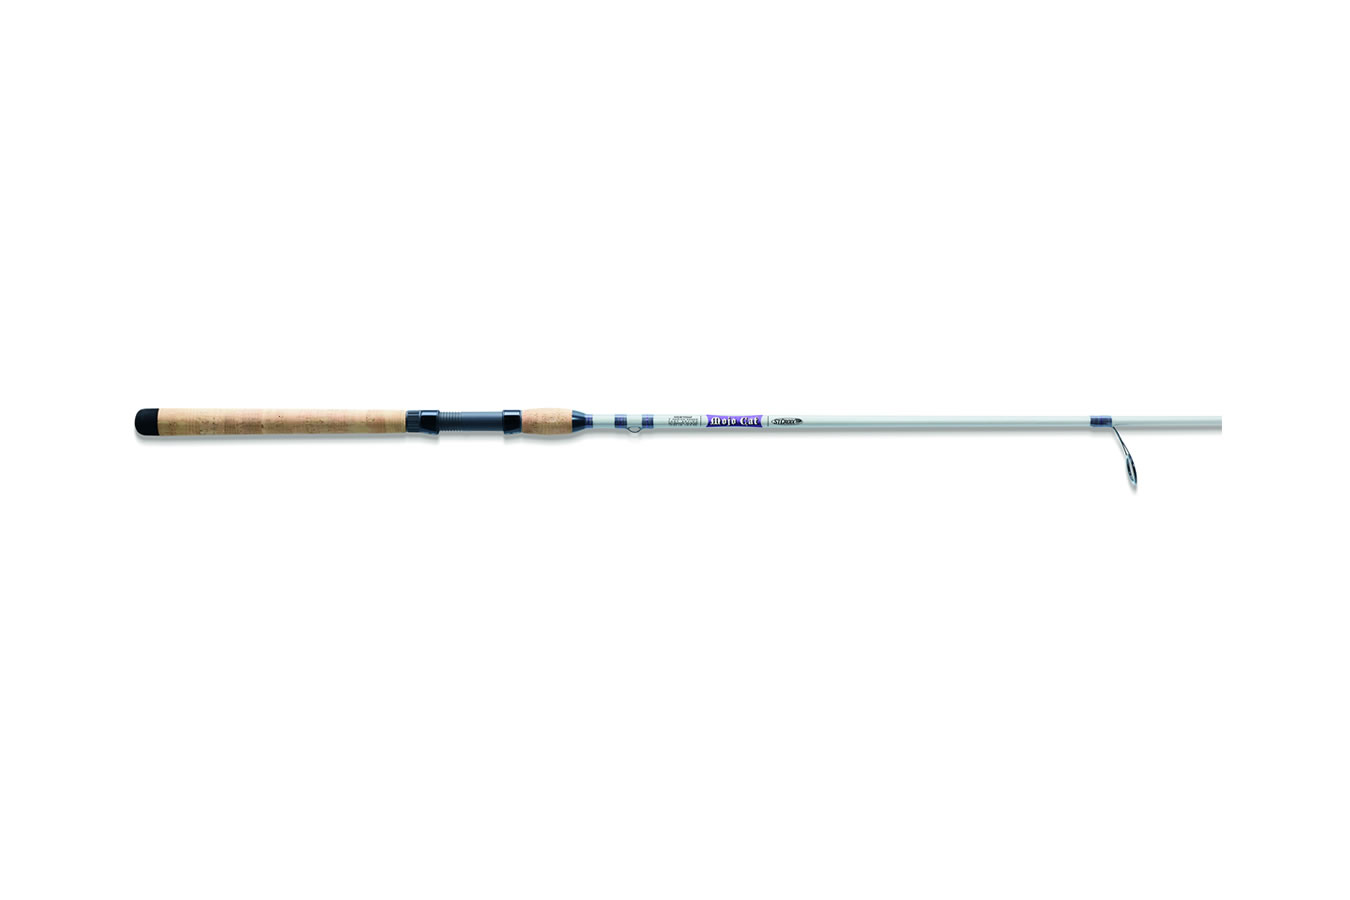 Discount St Croix Mojo Cat 7 ft - Medium Spinning Rod for Sale